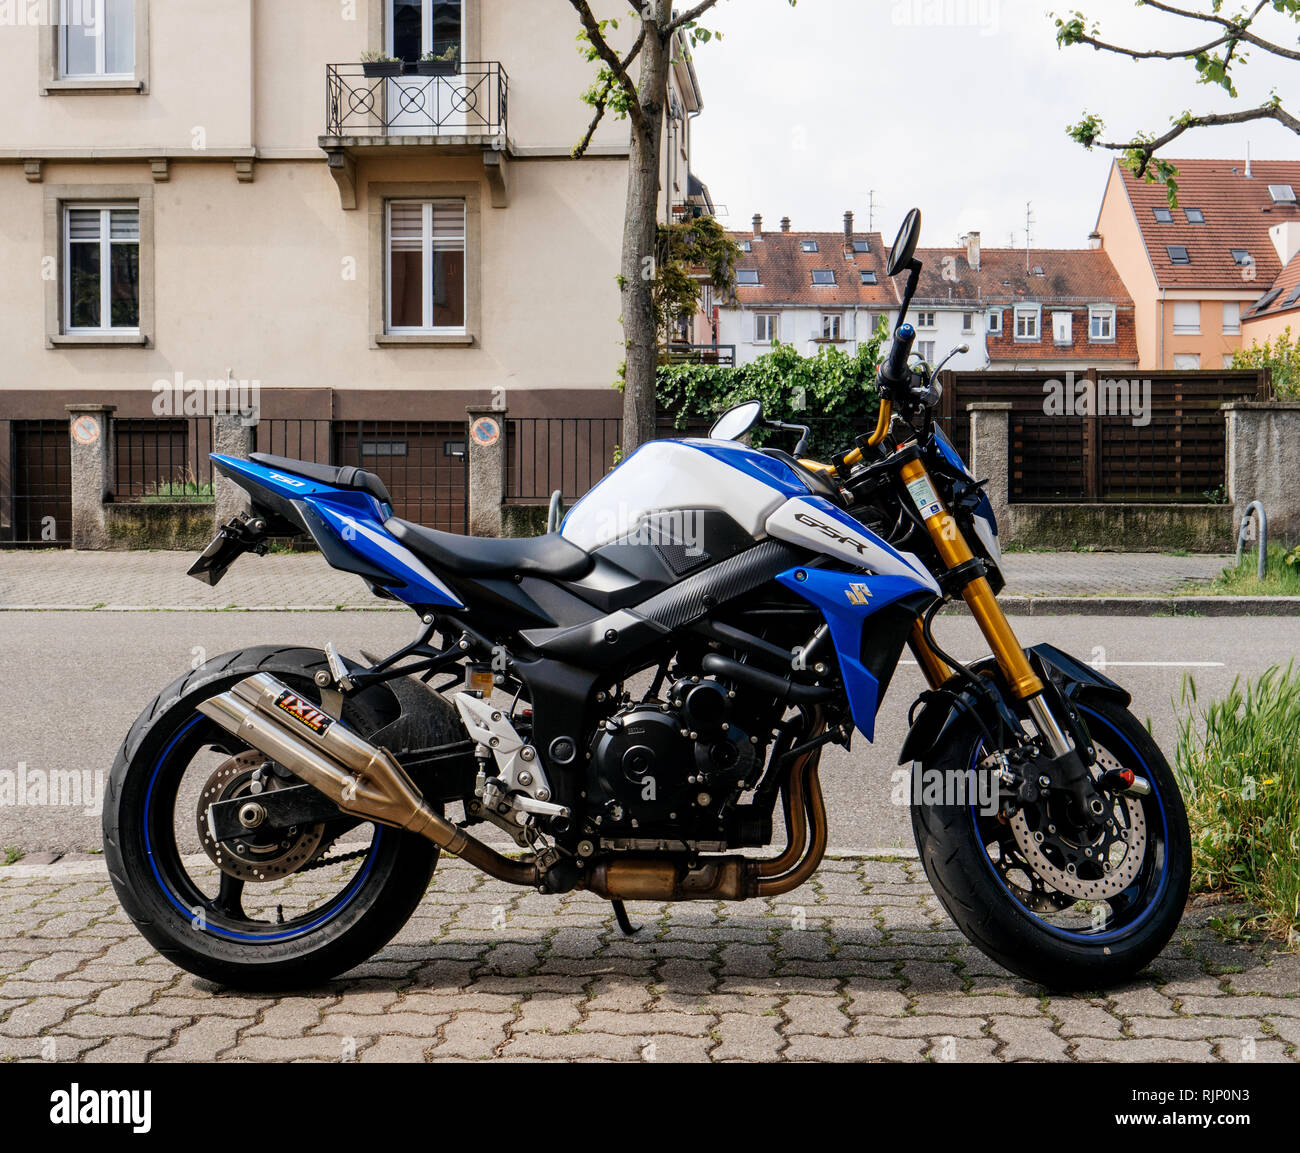 STRASBOURG, FRANCE - MAY 5, 2018: New fast SUZUKI GSR motorcycle bike  parked on street in France Stock Photo - Alamy